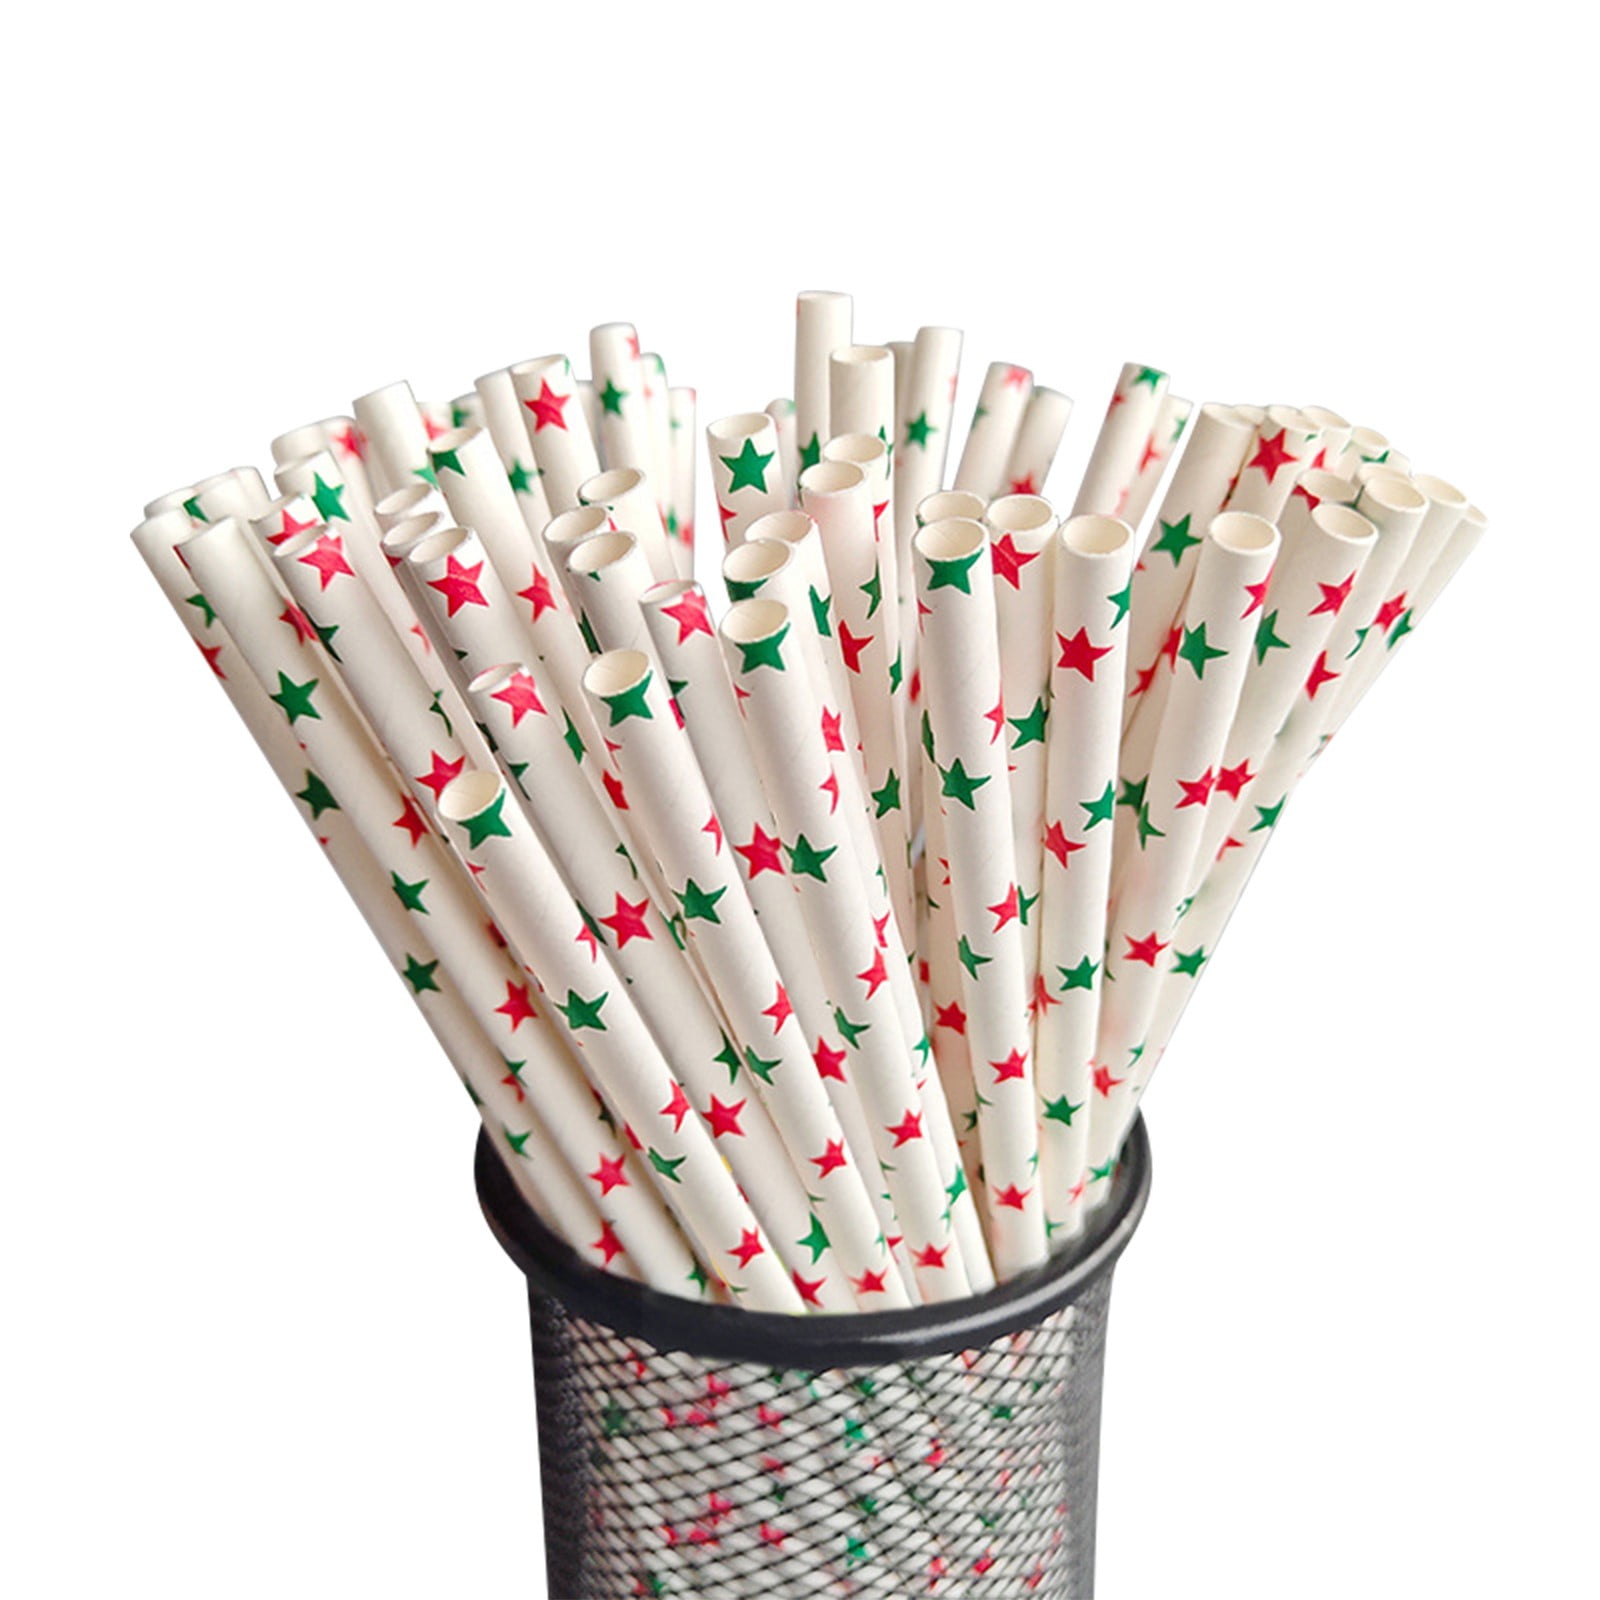 Colorful Straight Straw Wedding Birthday Party Strait Clear Glass Specialty  Drinking Straws Thick Straws Bar Tools From Homelab, $0.4